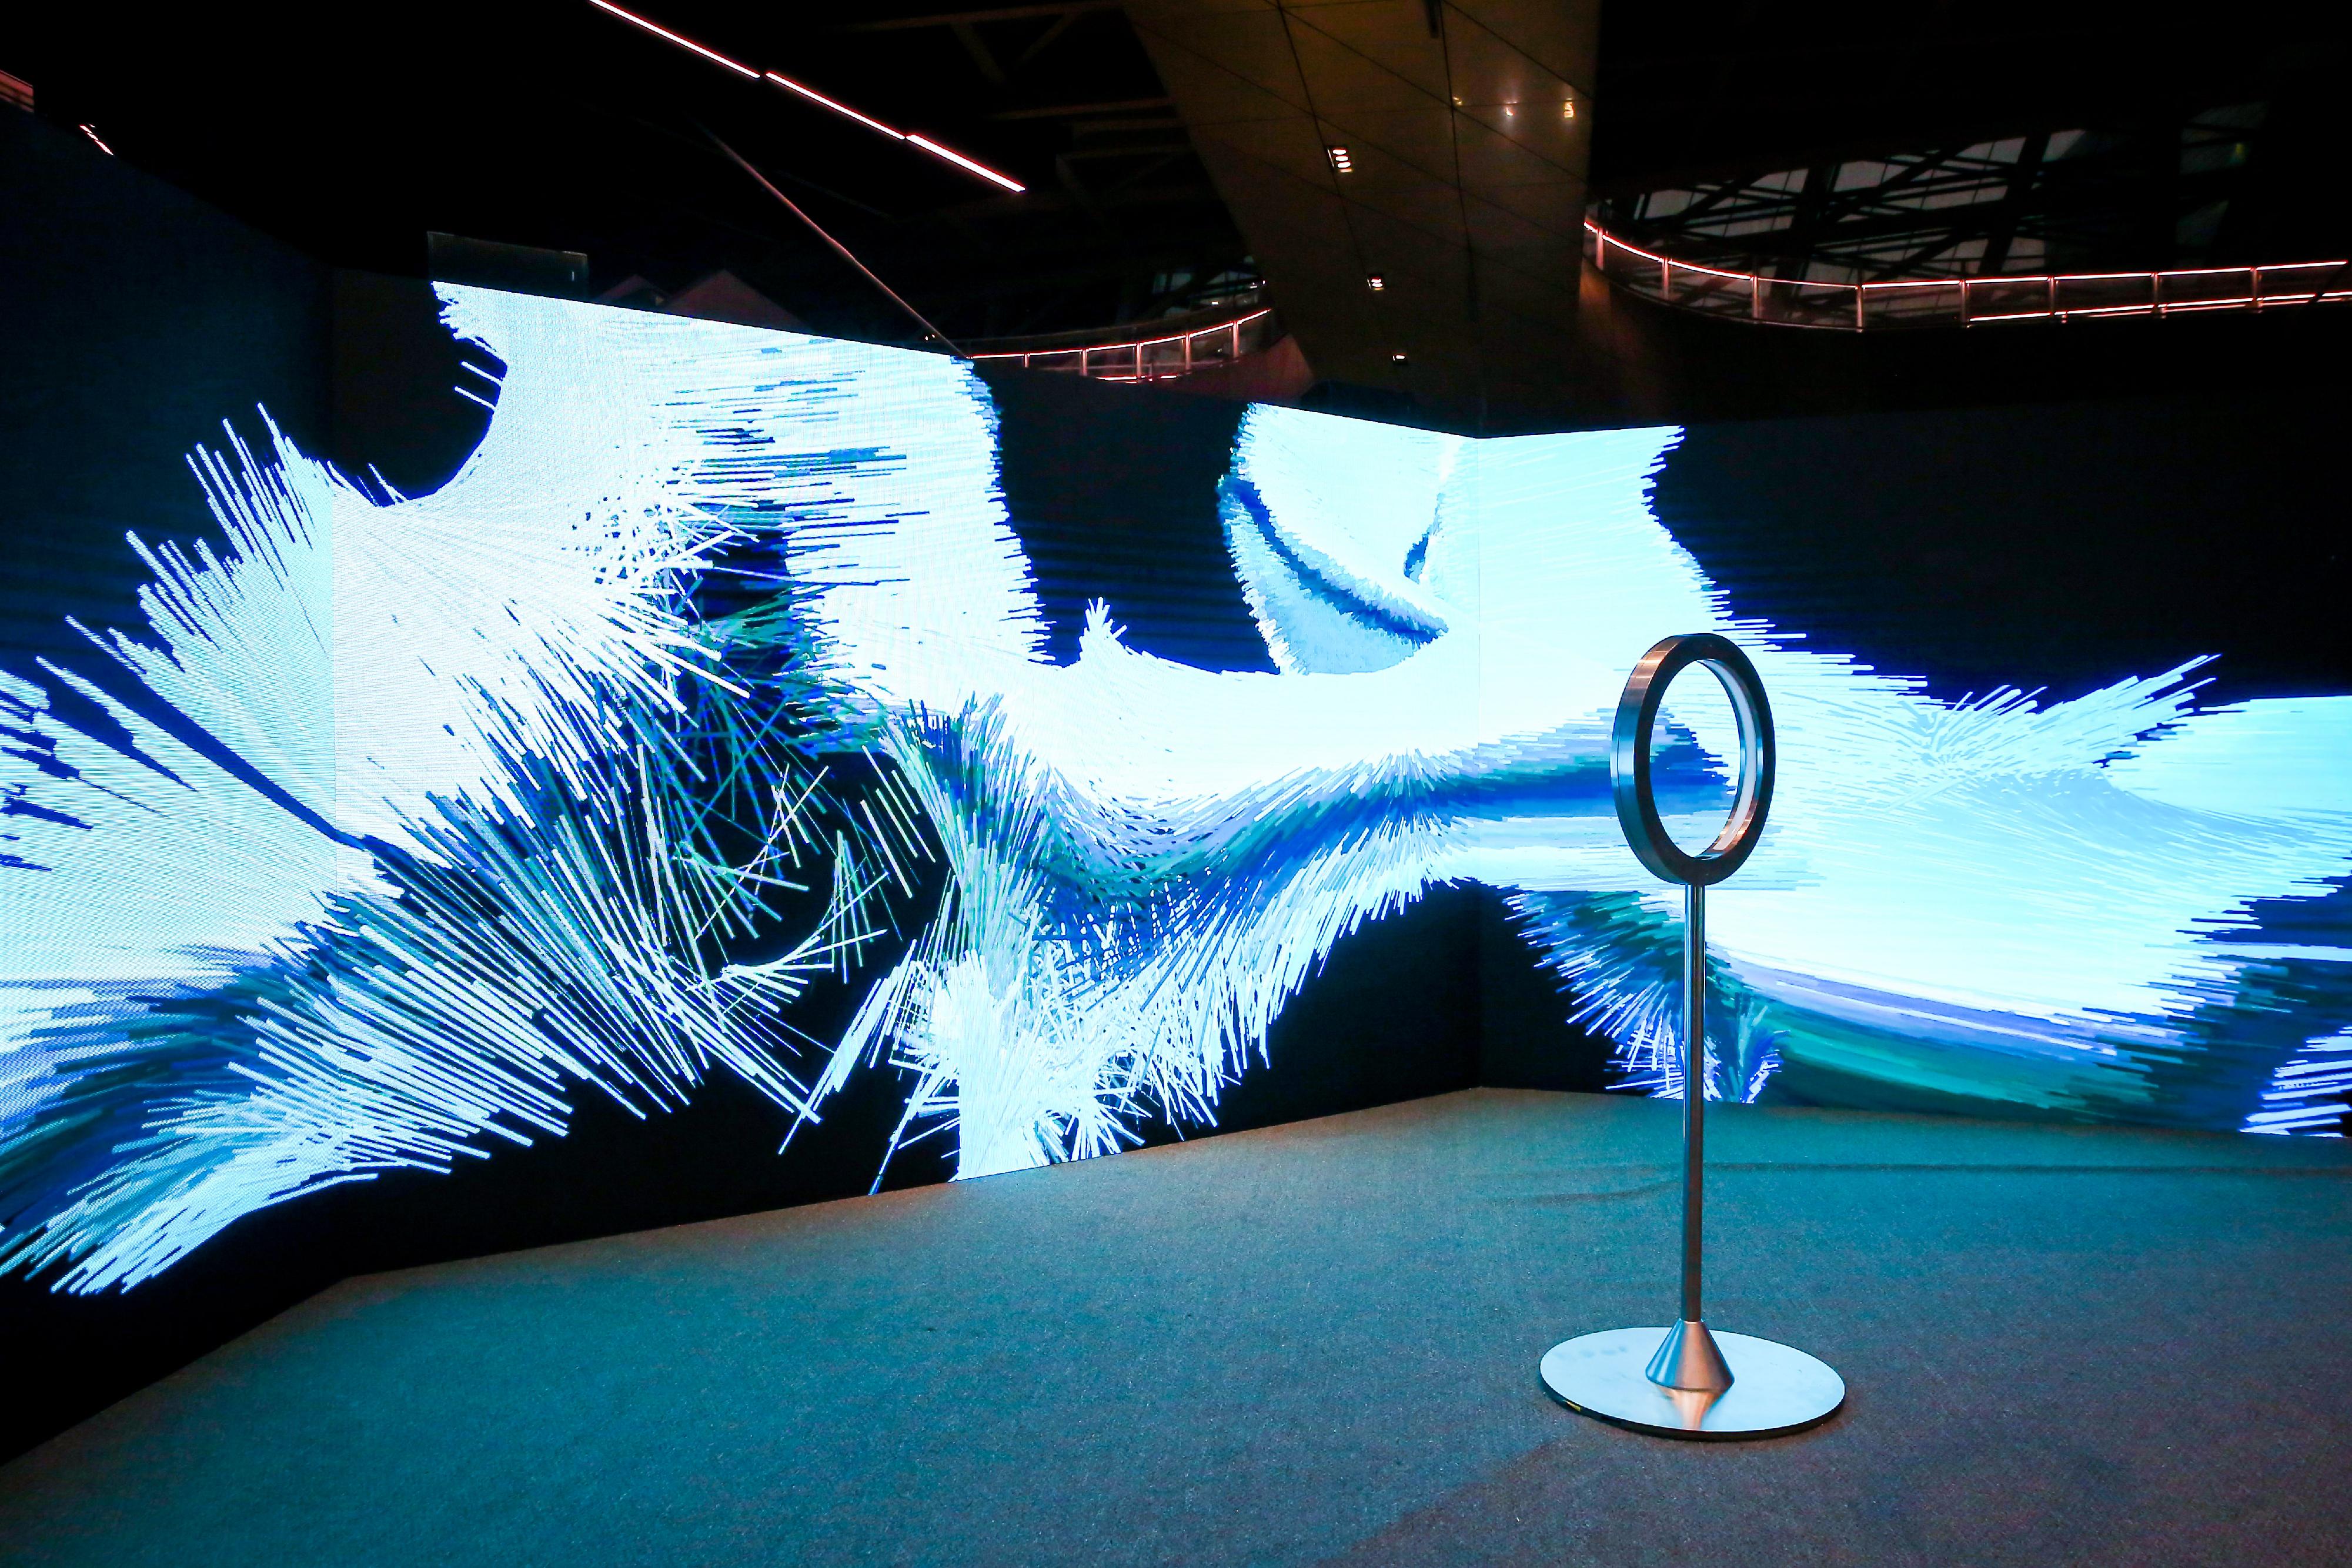 The Shenzhen stop of the "2022 Hong Kong-Macao Visual Art Biennale" is taking place at the Museum of Contemporary Art & Planning in Shenzhen. Photo shows an interactive immersive experience installation, "Cinemorpheque", created by Hong Kong artist Chris Cheung and his team. It was inspired by individual scenes captured from classic Hong Kong films with iconic seasonal backgrounds of spring, summer, autumn and winter. Audiences could move their hands gently in the middle of the ring-shaped device to view the transition of four-season sceneries in classic Hong Kong movies.